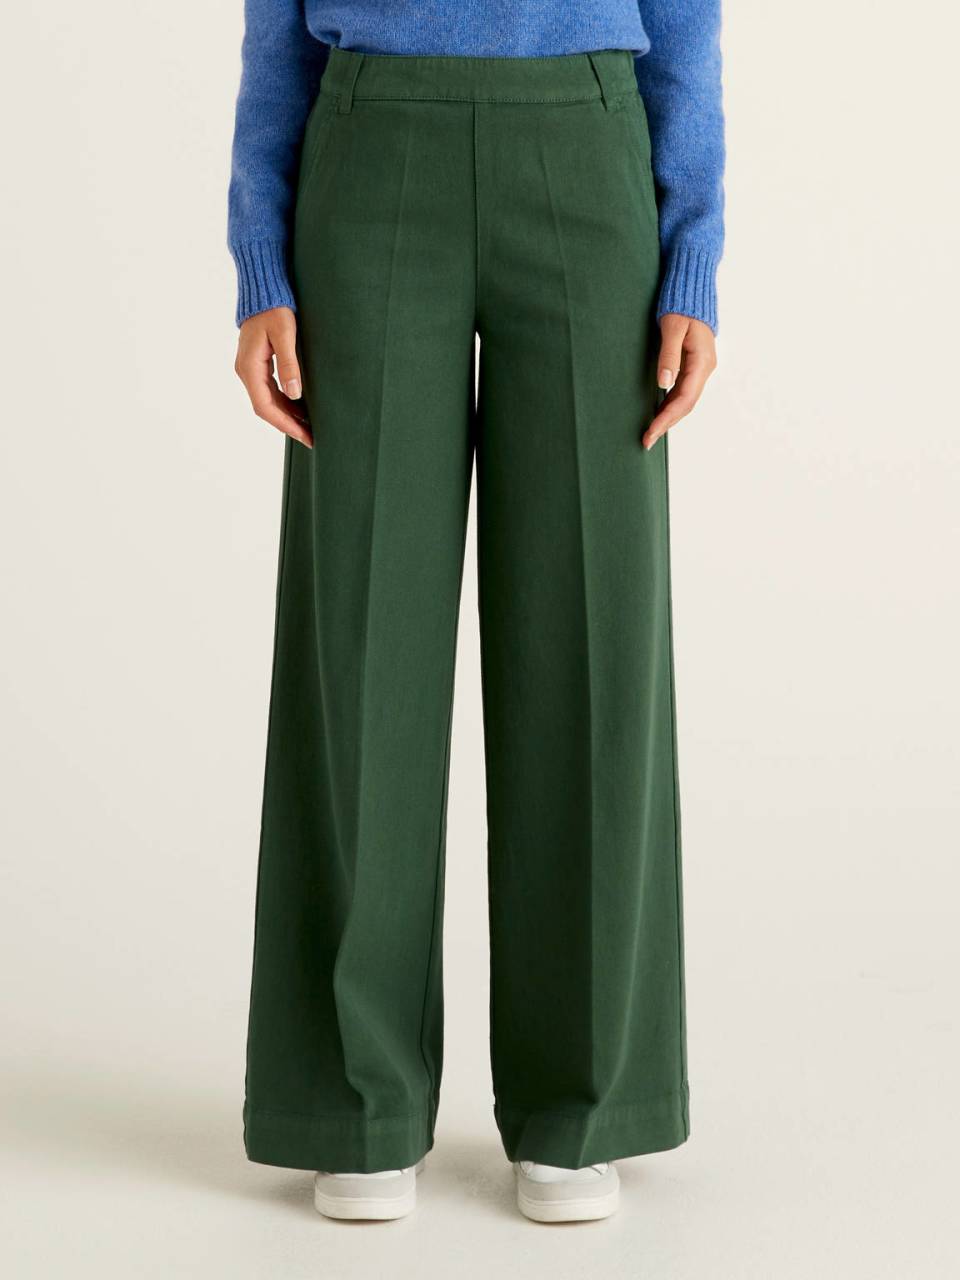 Benetton Trousers with wide leg in cotton - 4DUK558U3_30G